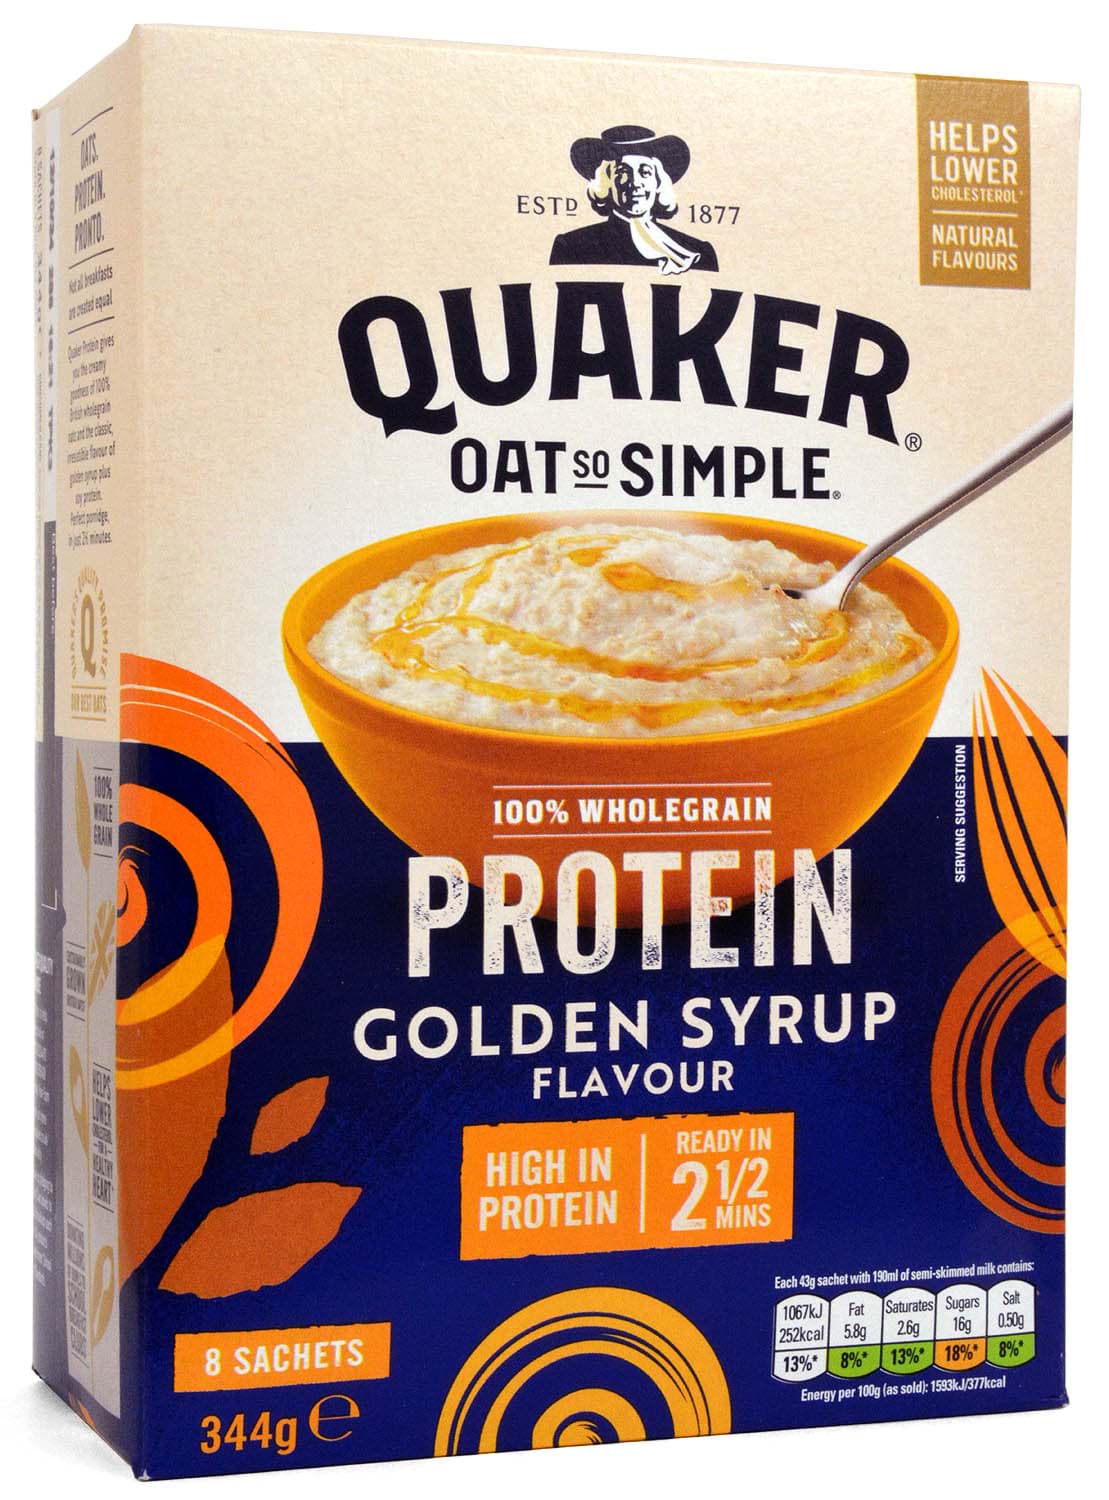 Picture of Quaker Oat So Simple Protein Golden Syrup 344g